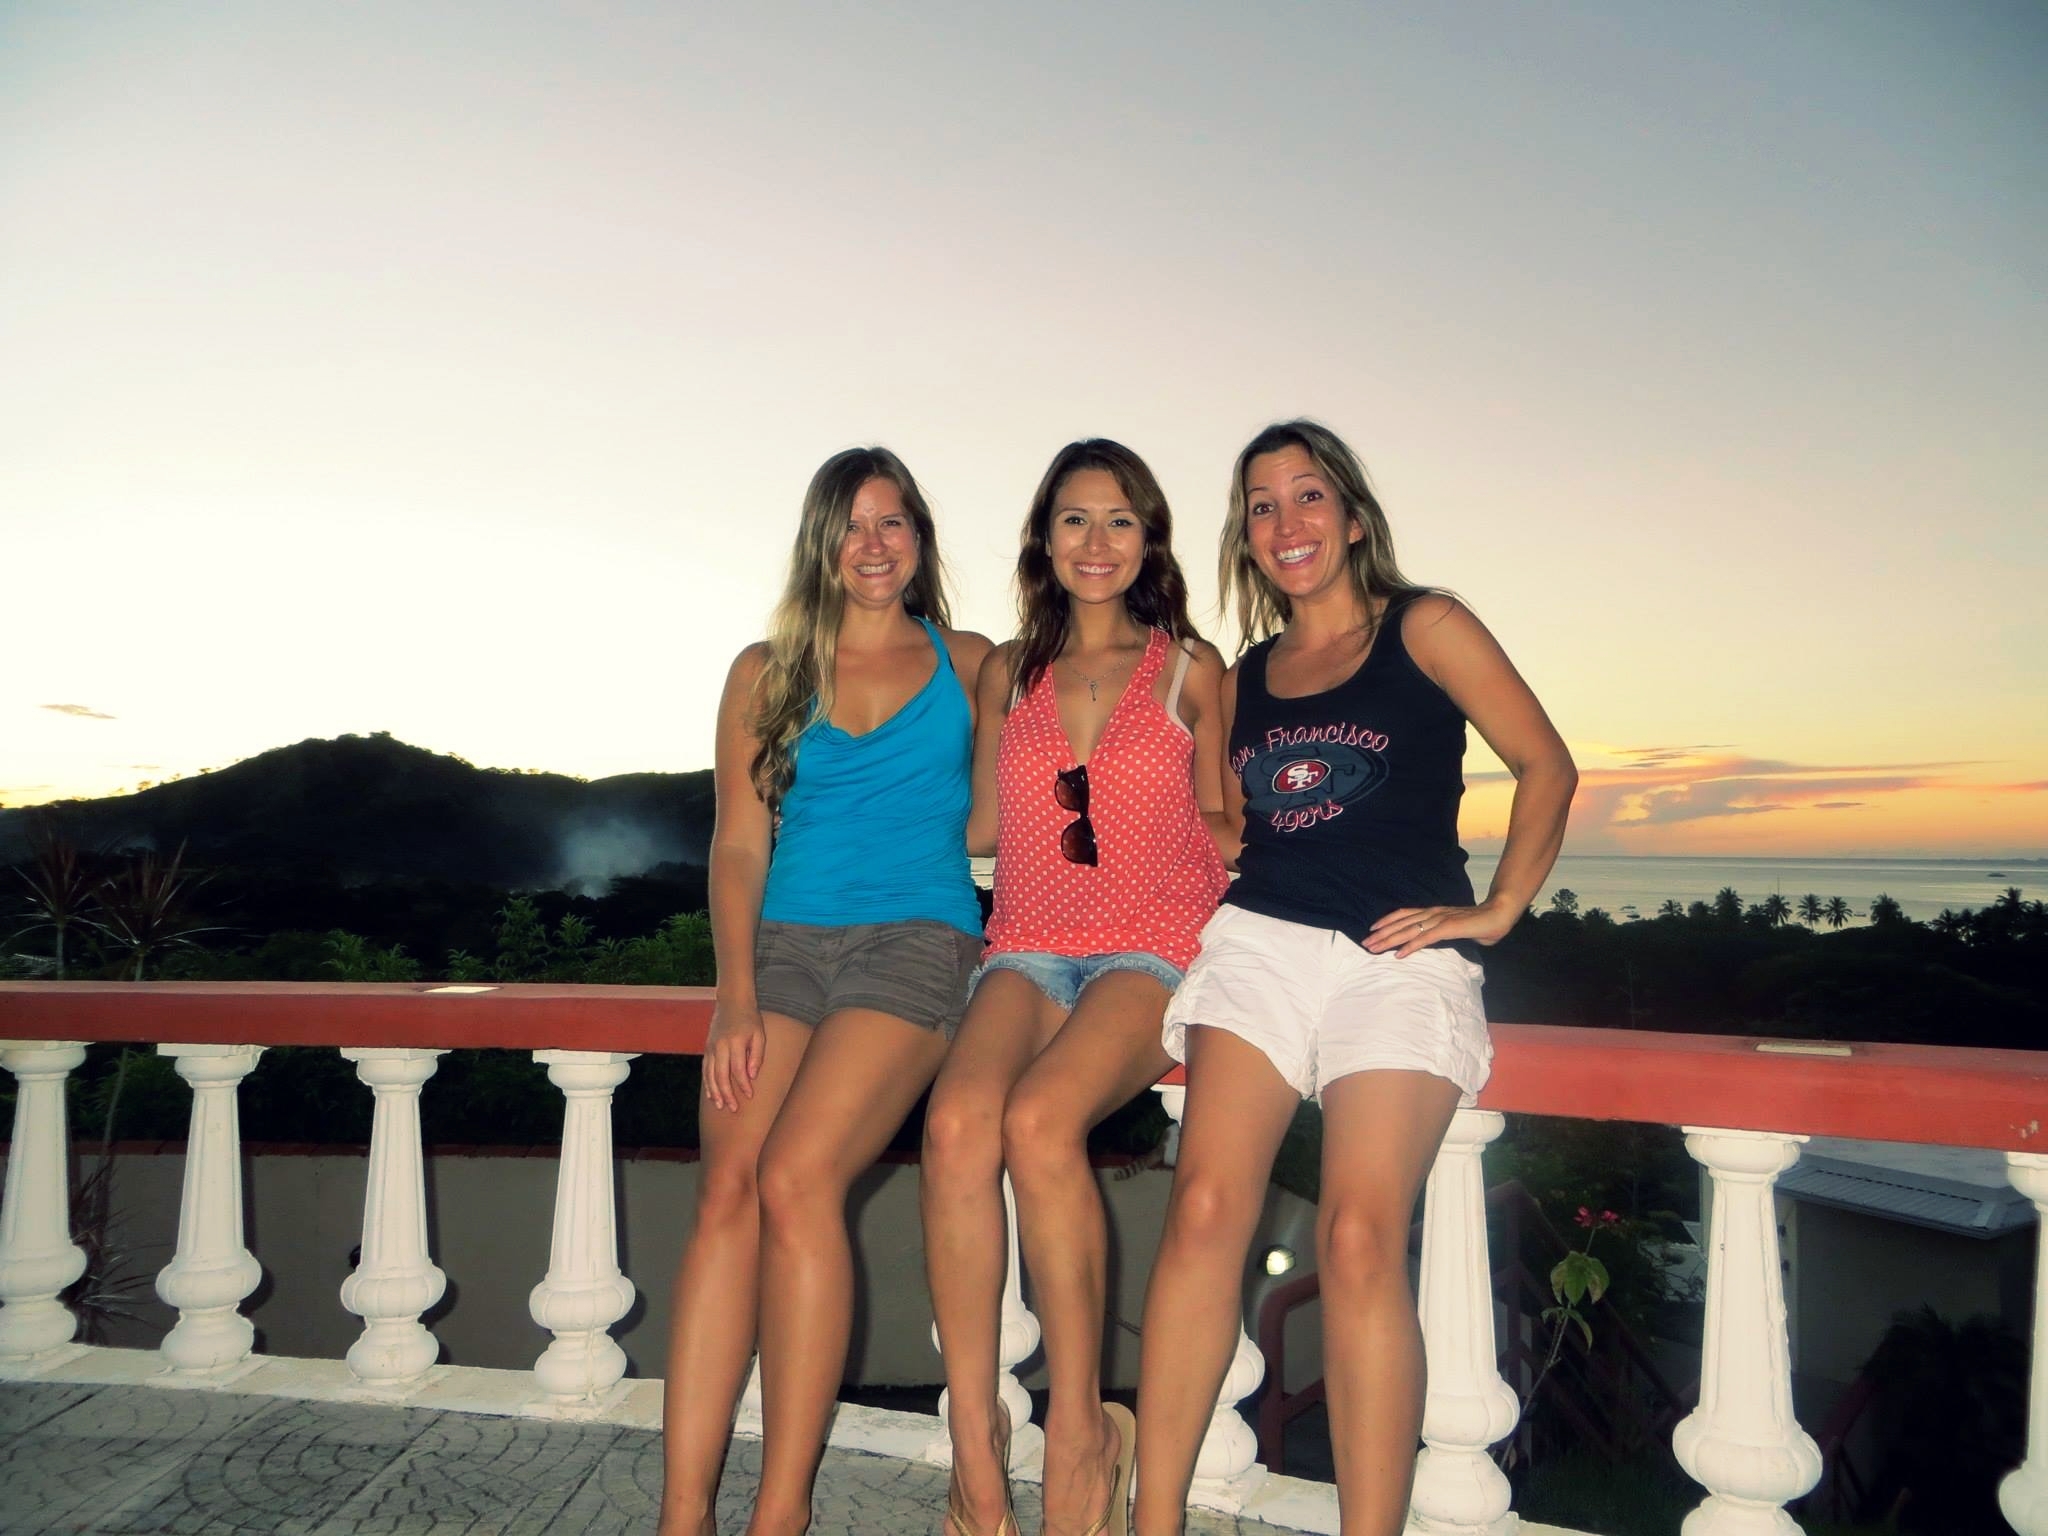 Me (middle) in Costa Rica with friends in 2013 at my lowest weight